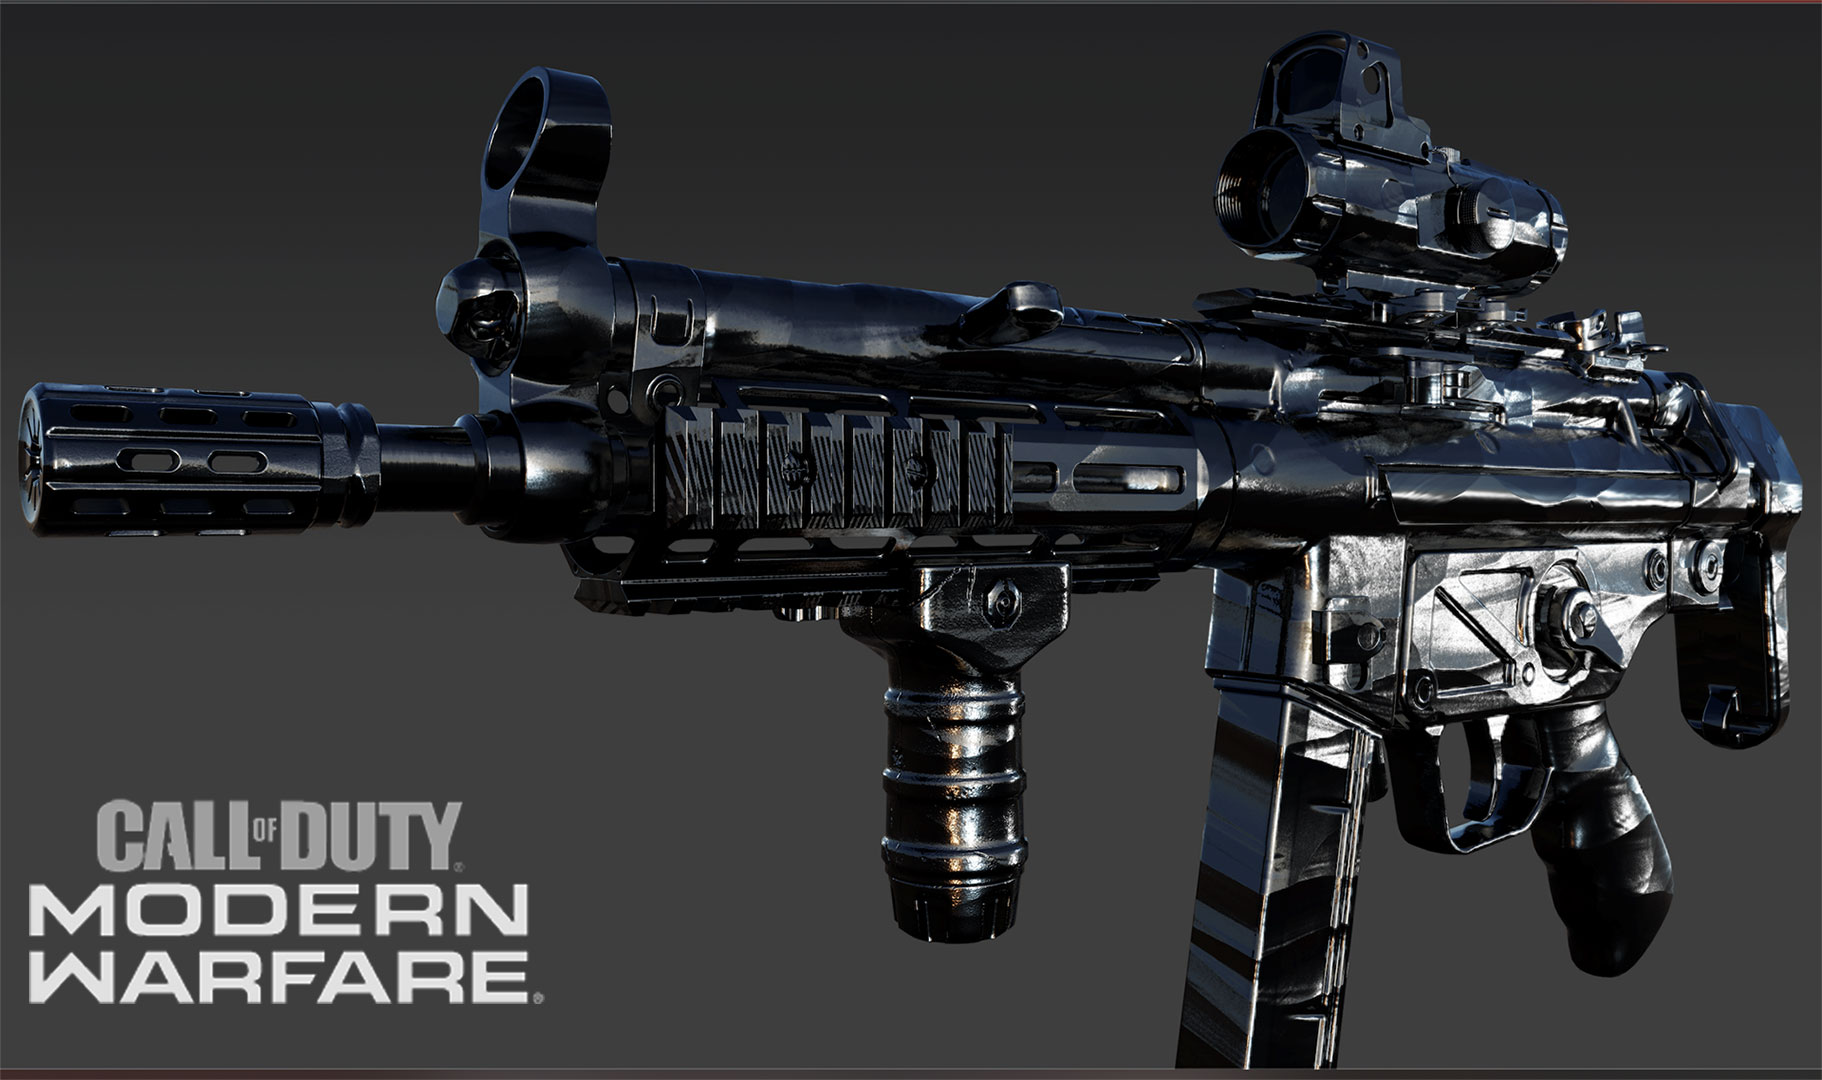 Become A True Weapon Master With Obsidian Camo Now In Call Of Duty Modern Warfare - hex gaming roblox gun build and destroy